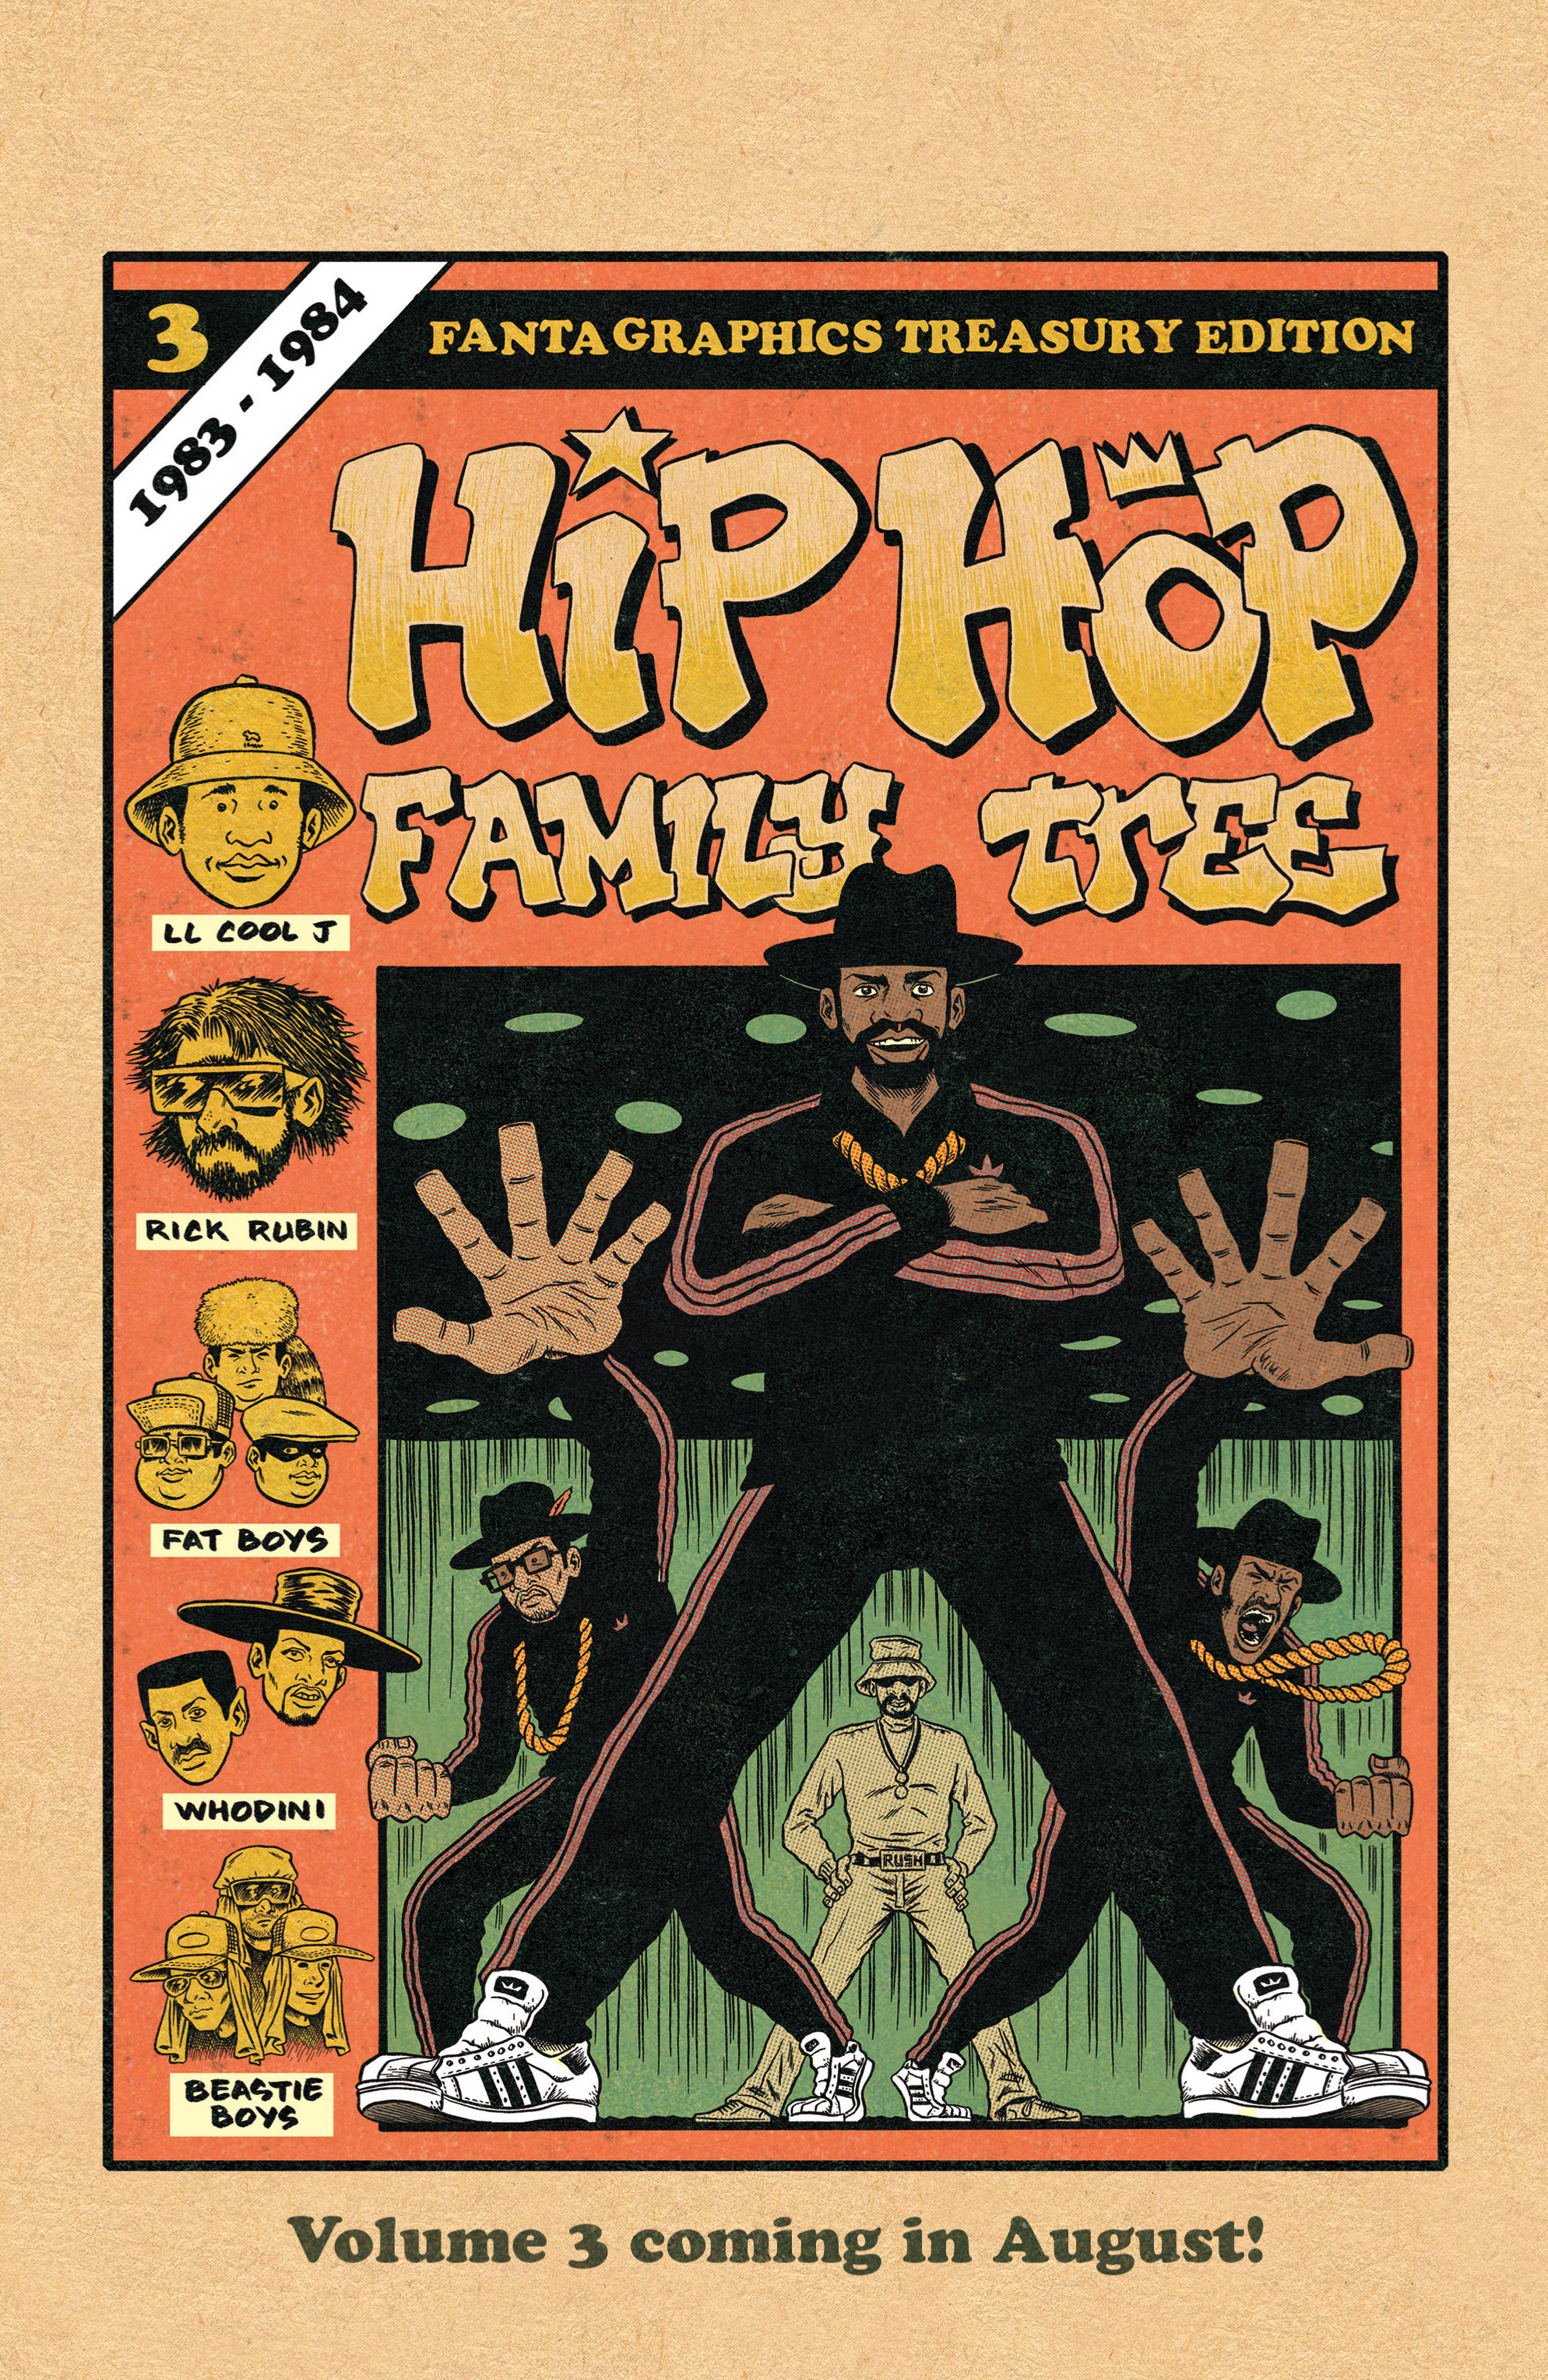 Read online Free Comic Book Day 2015 comic -  Issue # Hip Hop Family Tree Three-in-One - Featuring Cosplayers - 16